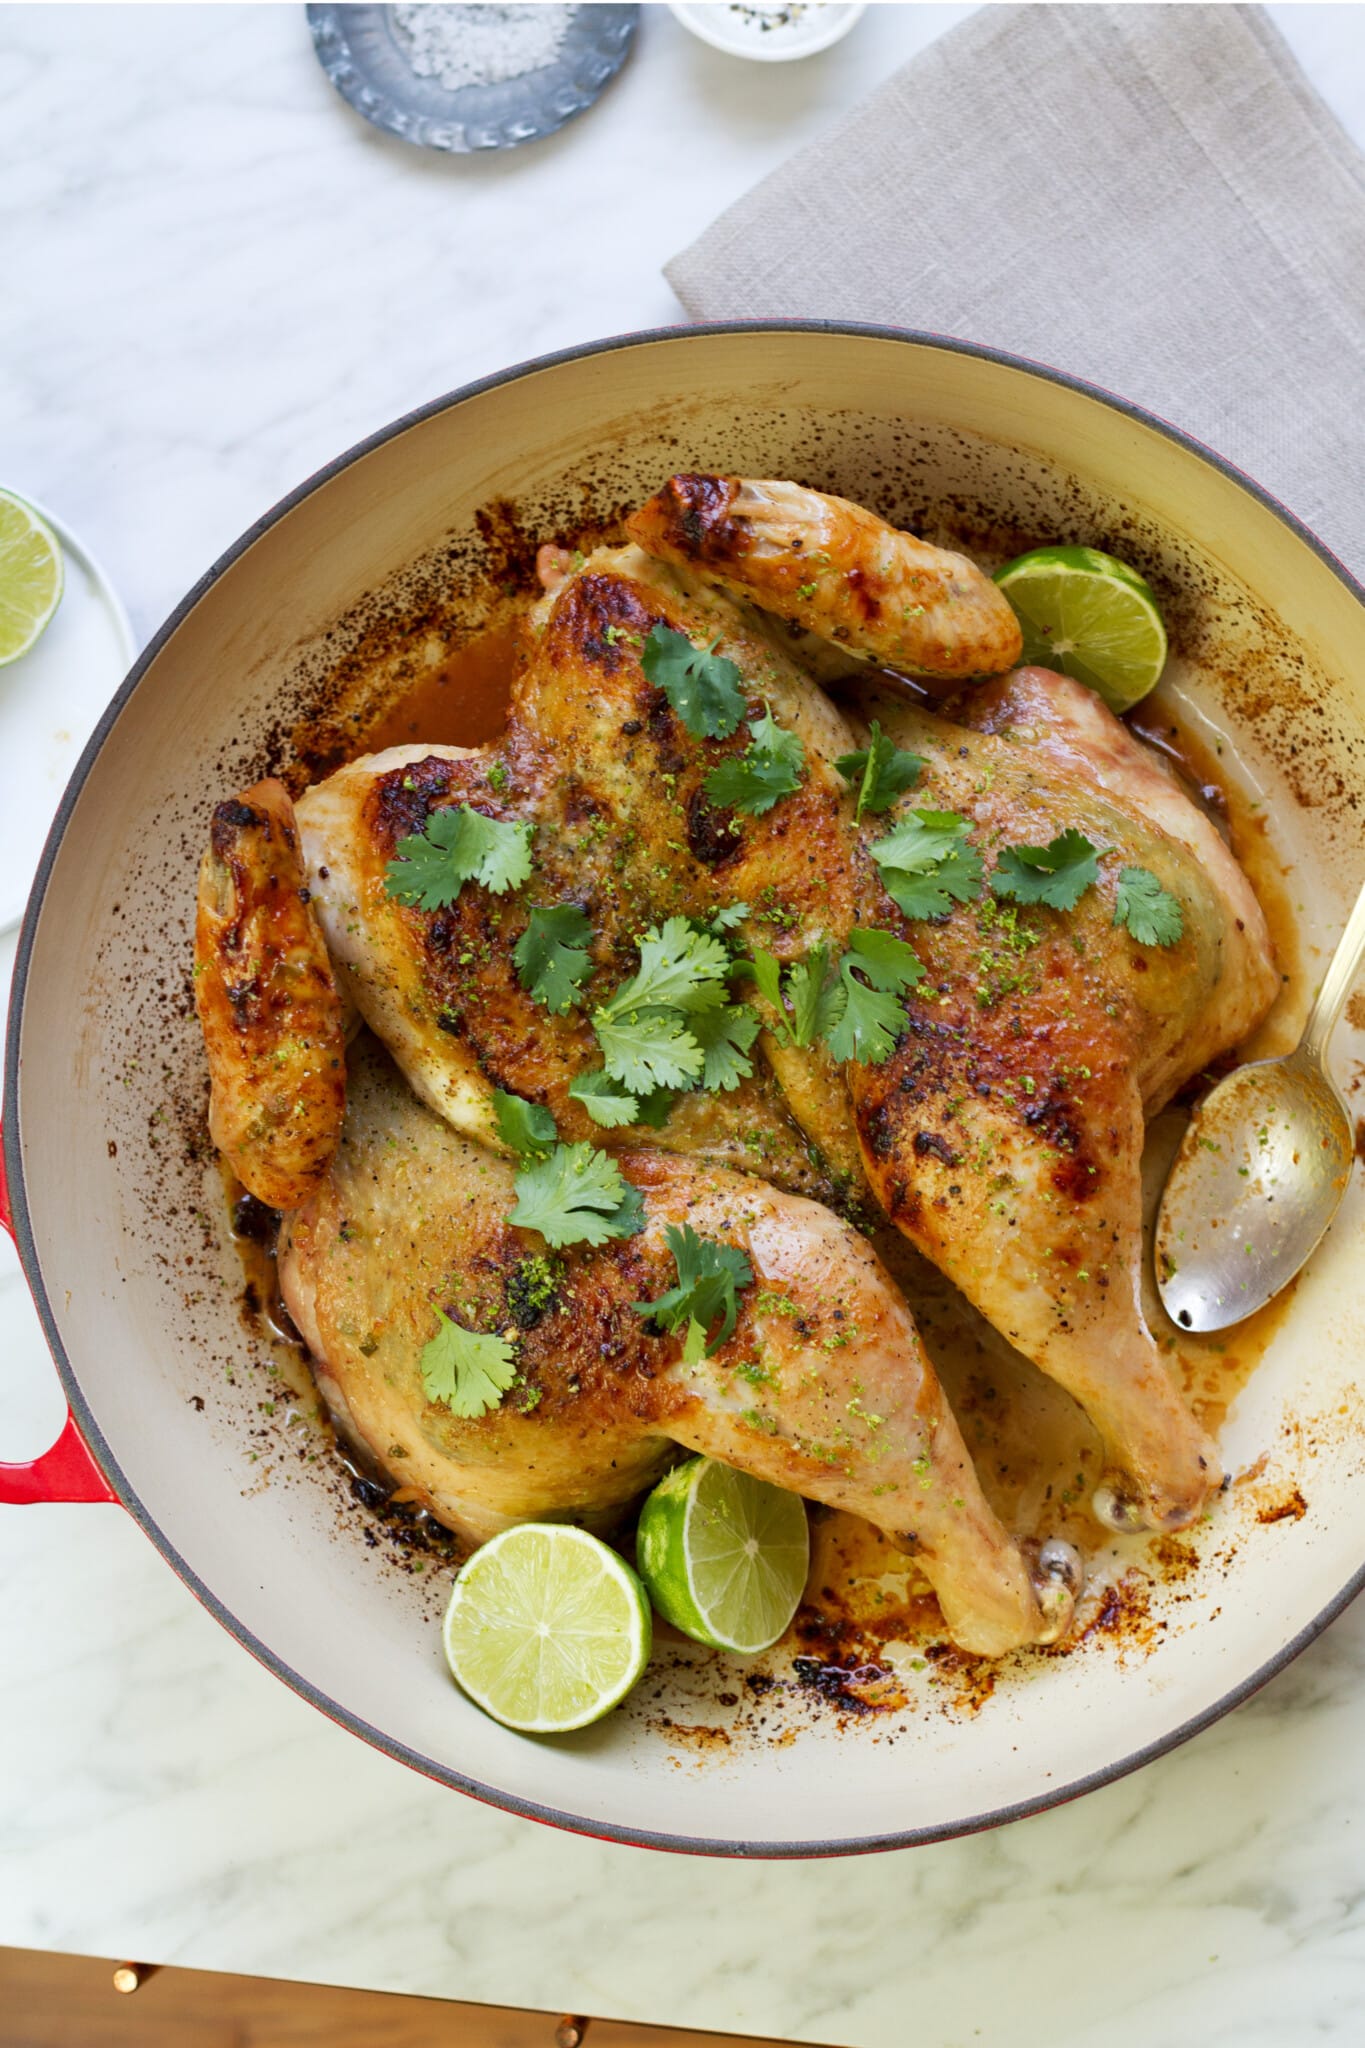 20 Healthy Recipes - Roasted Cilantro Chile Lime Spatchcock Chicken Recipe @saltandwind